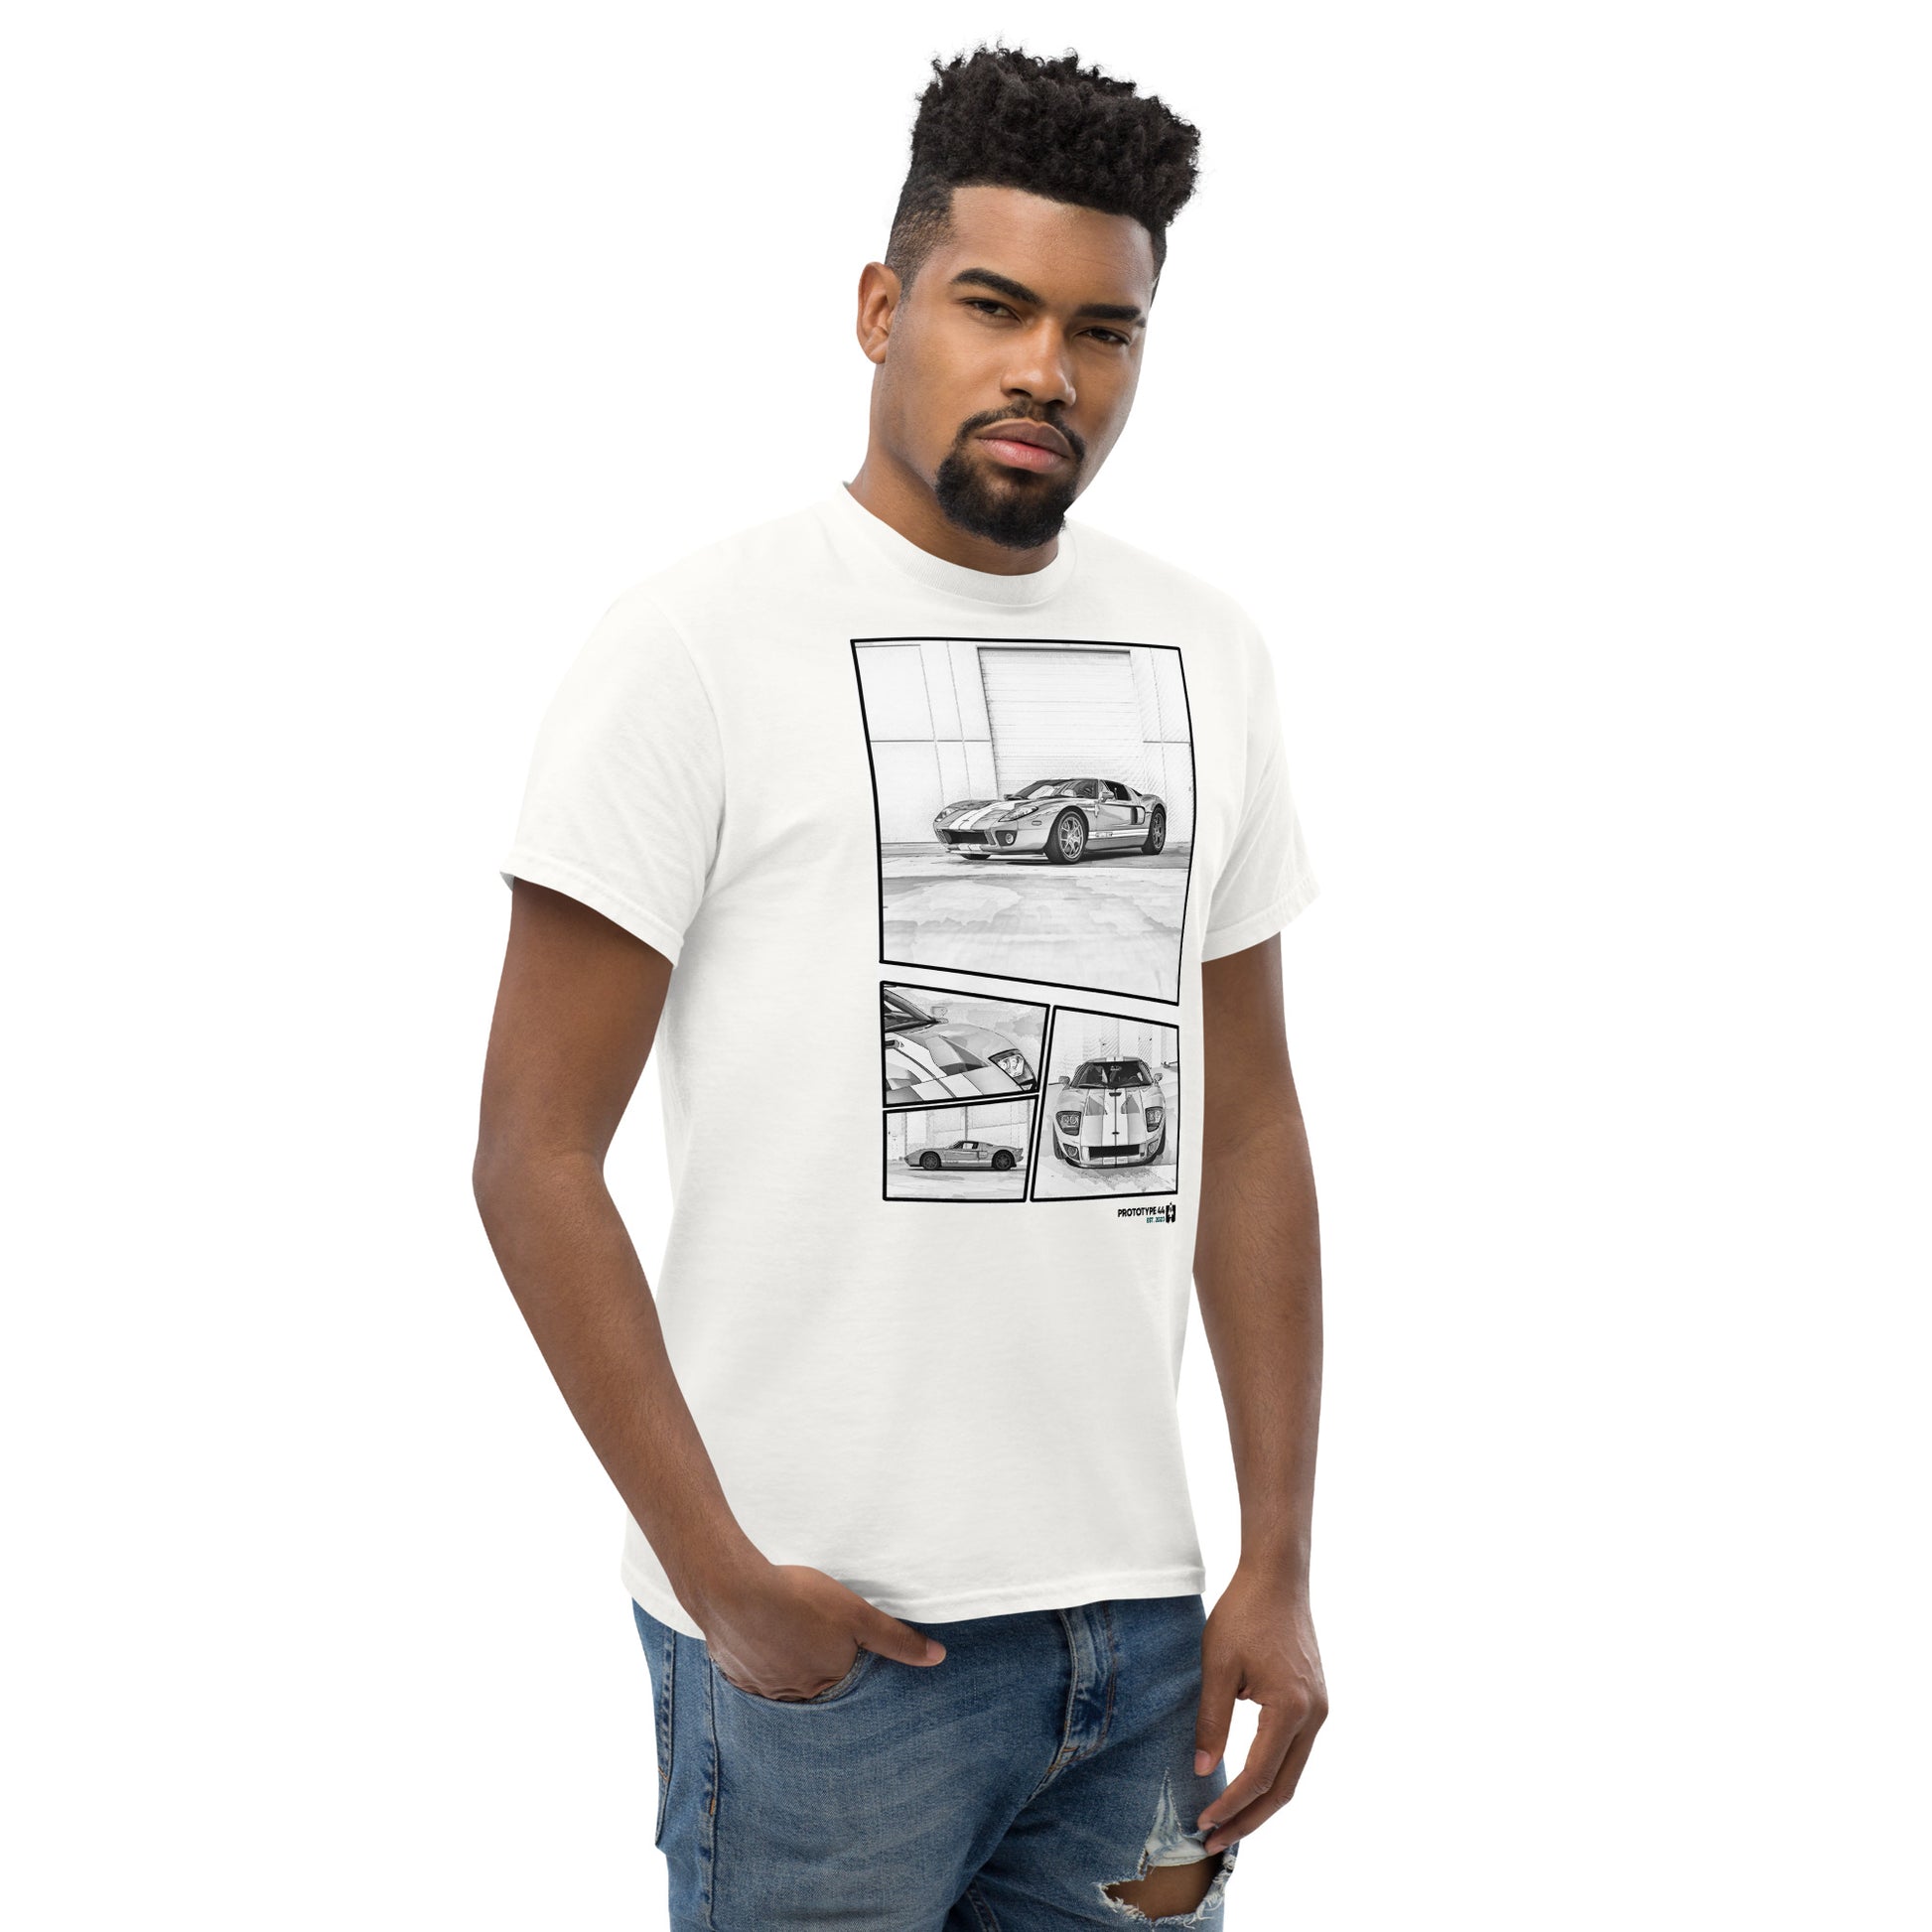 Man looking serious wearing the Ford GT graphic T-shirt